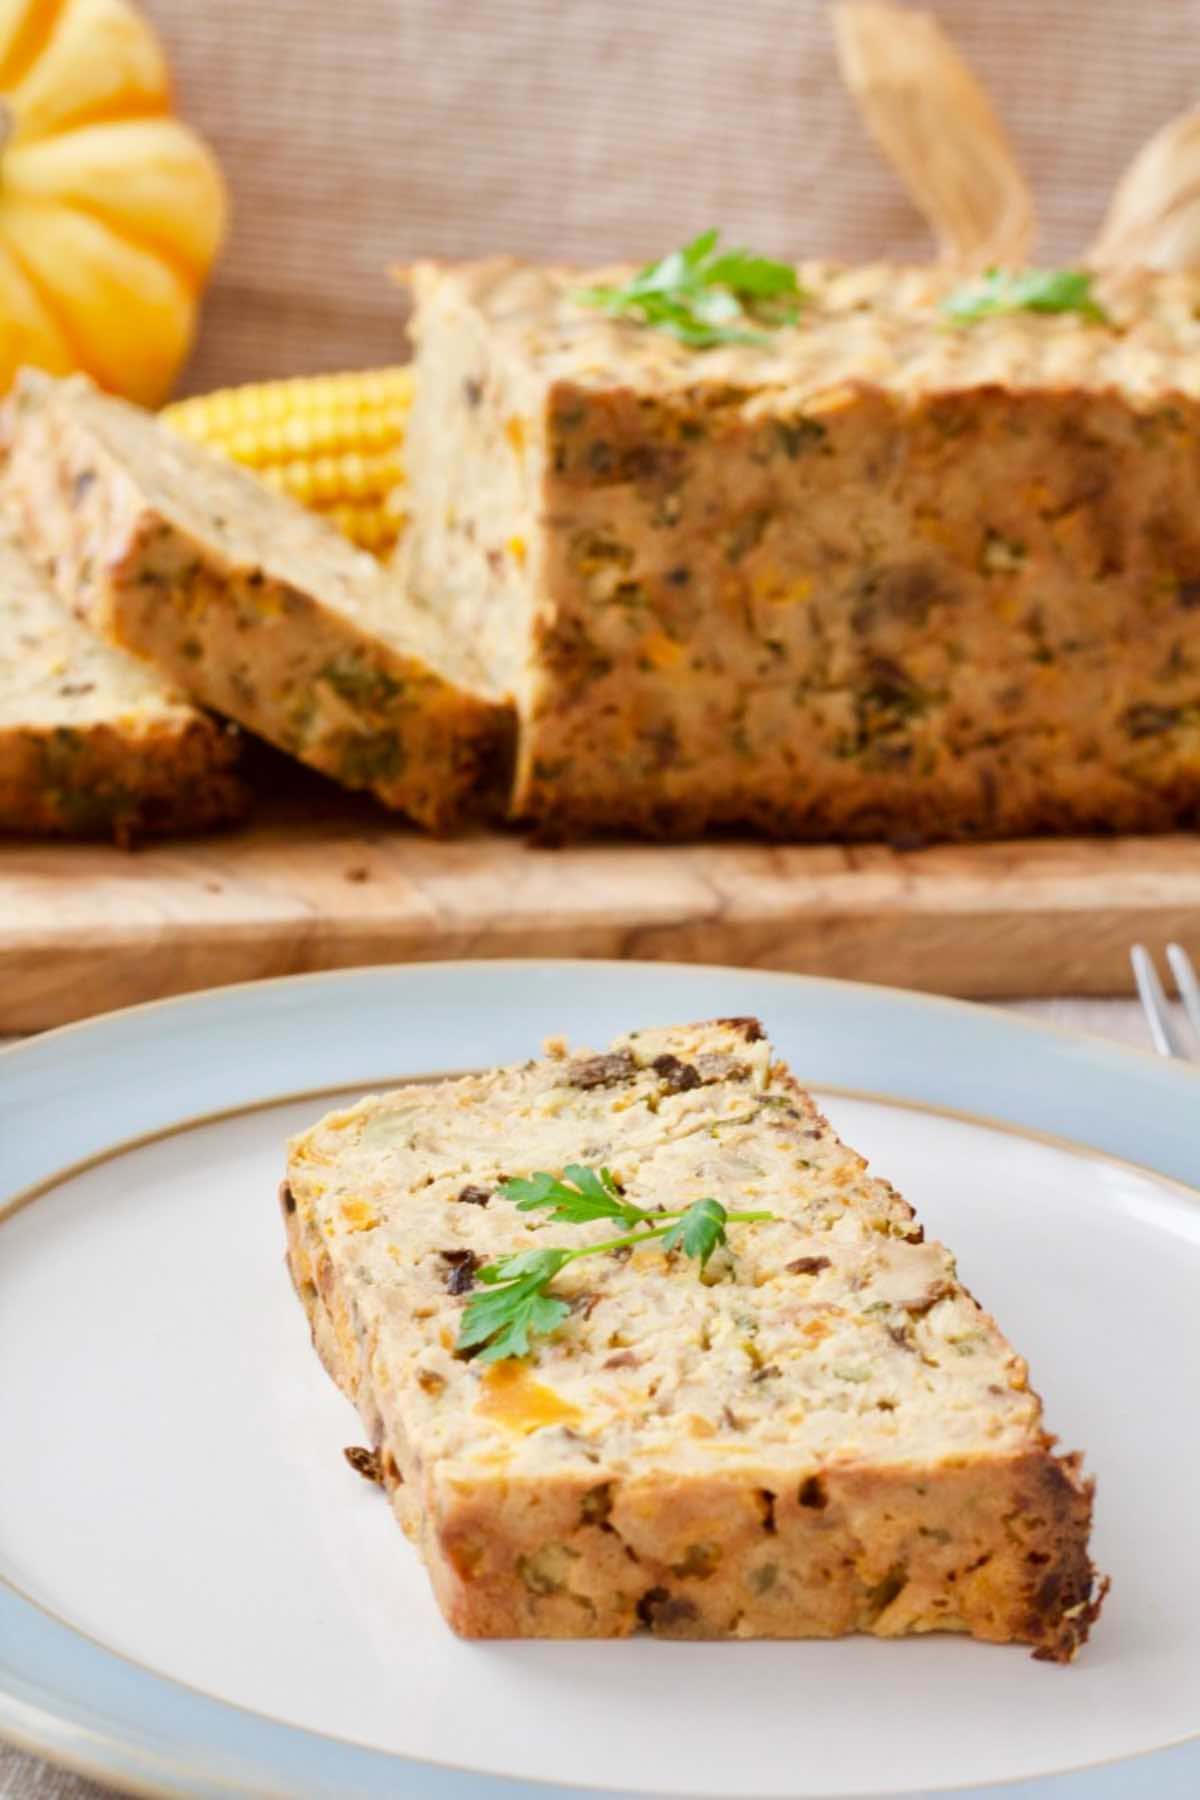 Veggie loaf slice on a plate garnished with fresh parsley, loaf in the background.